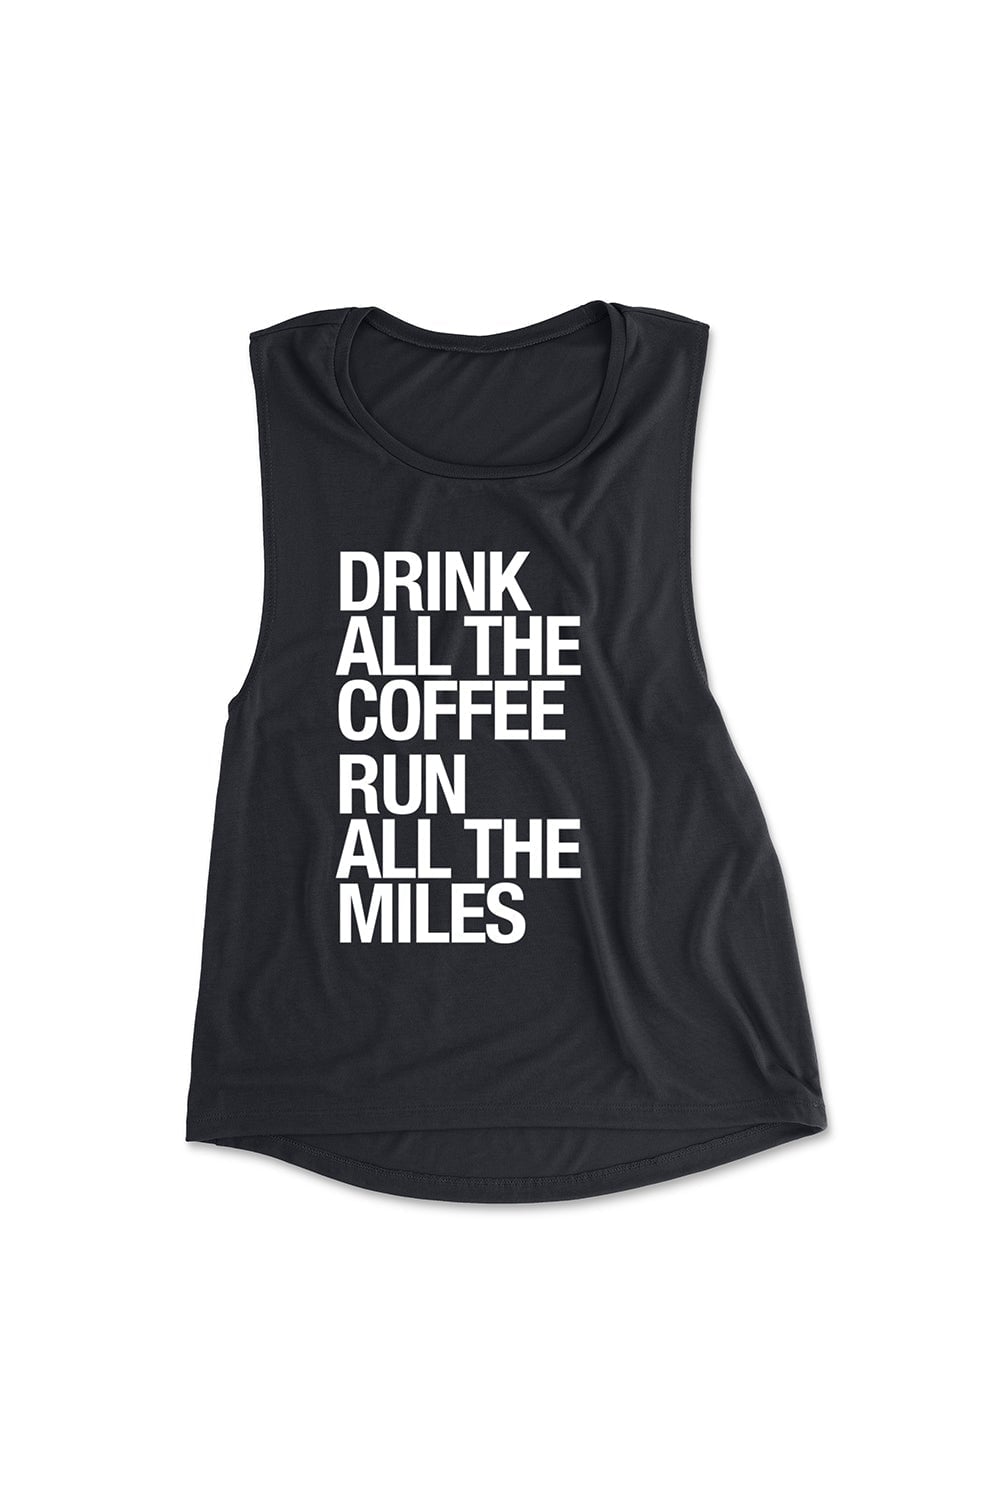 Sarah Marie Design Studio Drink All The Coffee, Run All The Miles Muscle Tank